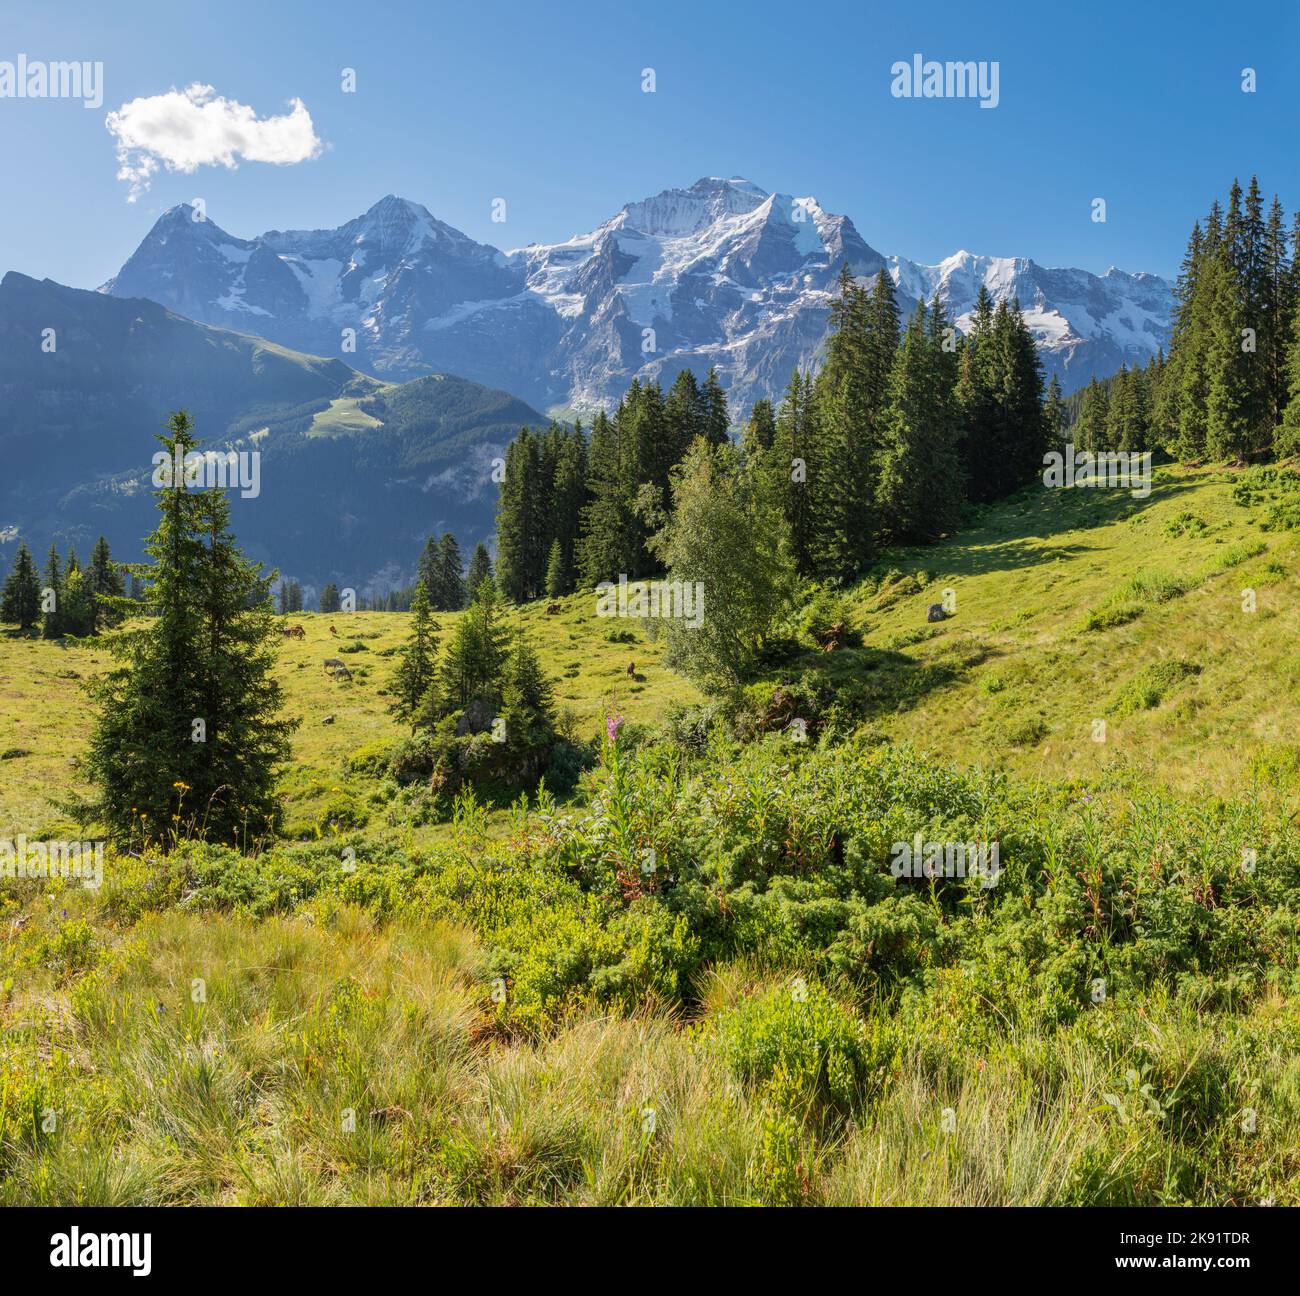 The Bernese alps with the Jungfrau, Monch and Eiger peaks over the alps meadows Stock Photo